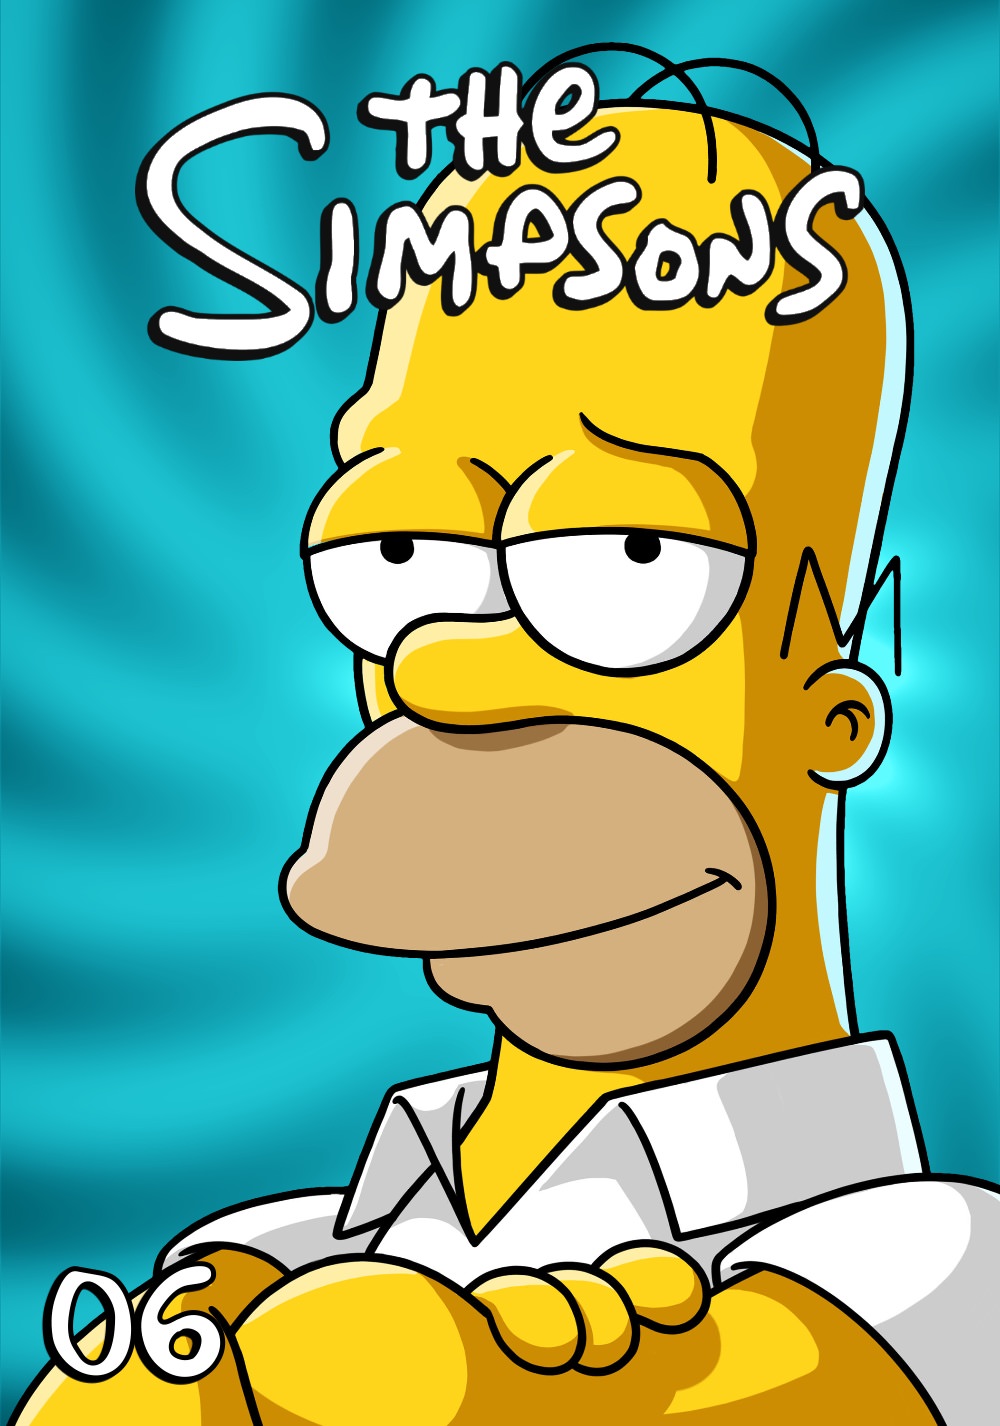 The Simpsons *Ultimate Collection* S06 (1994) BDRip 1080p HEVC 10-bit EAC3-5.1 MultiSub Retail